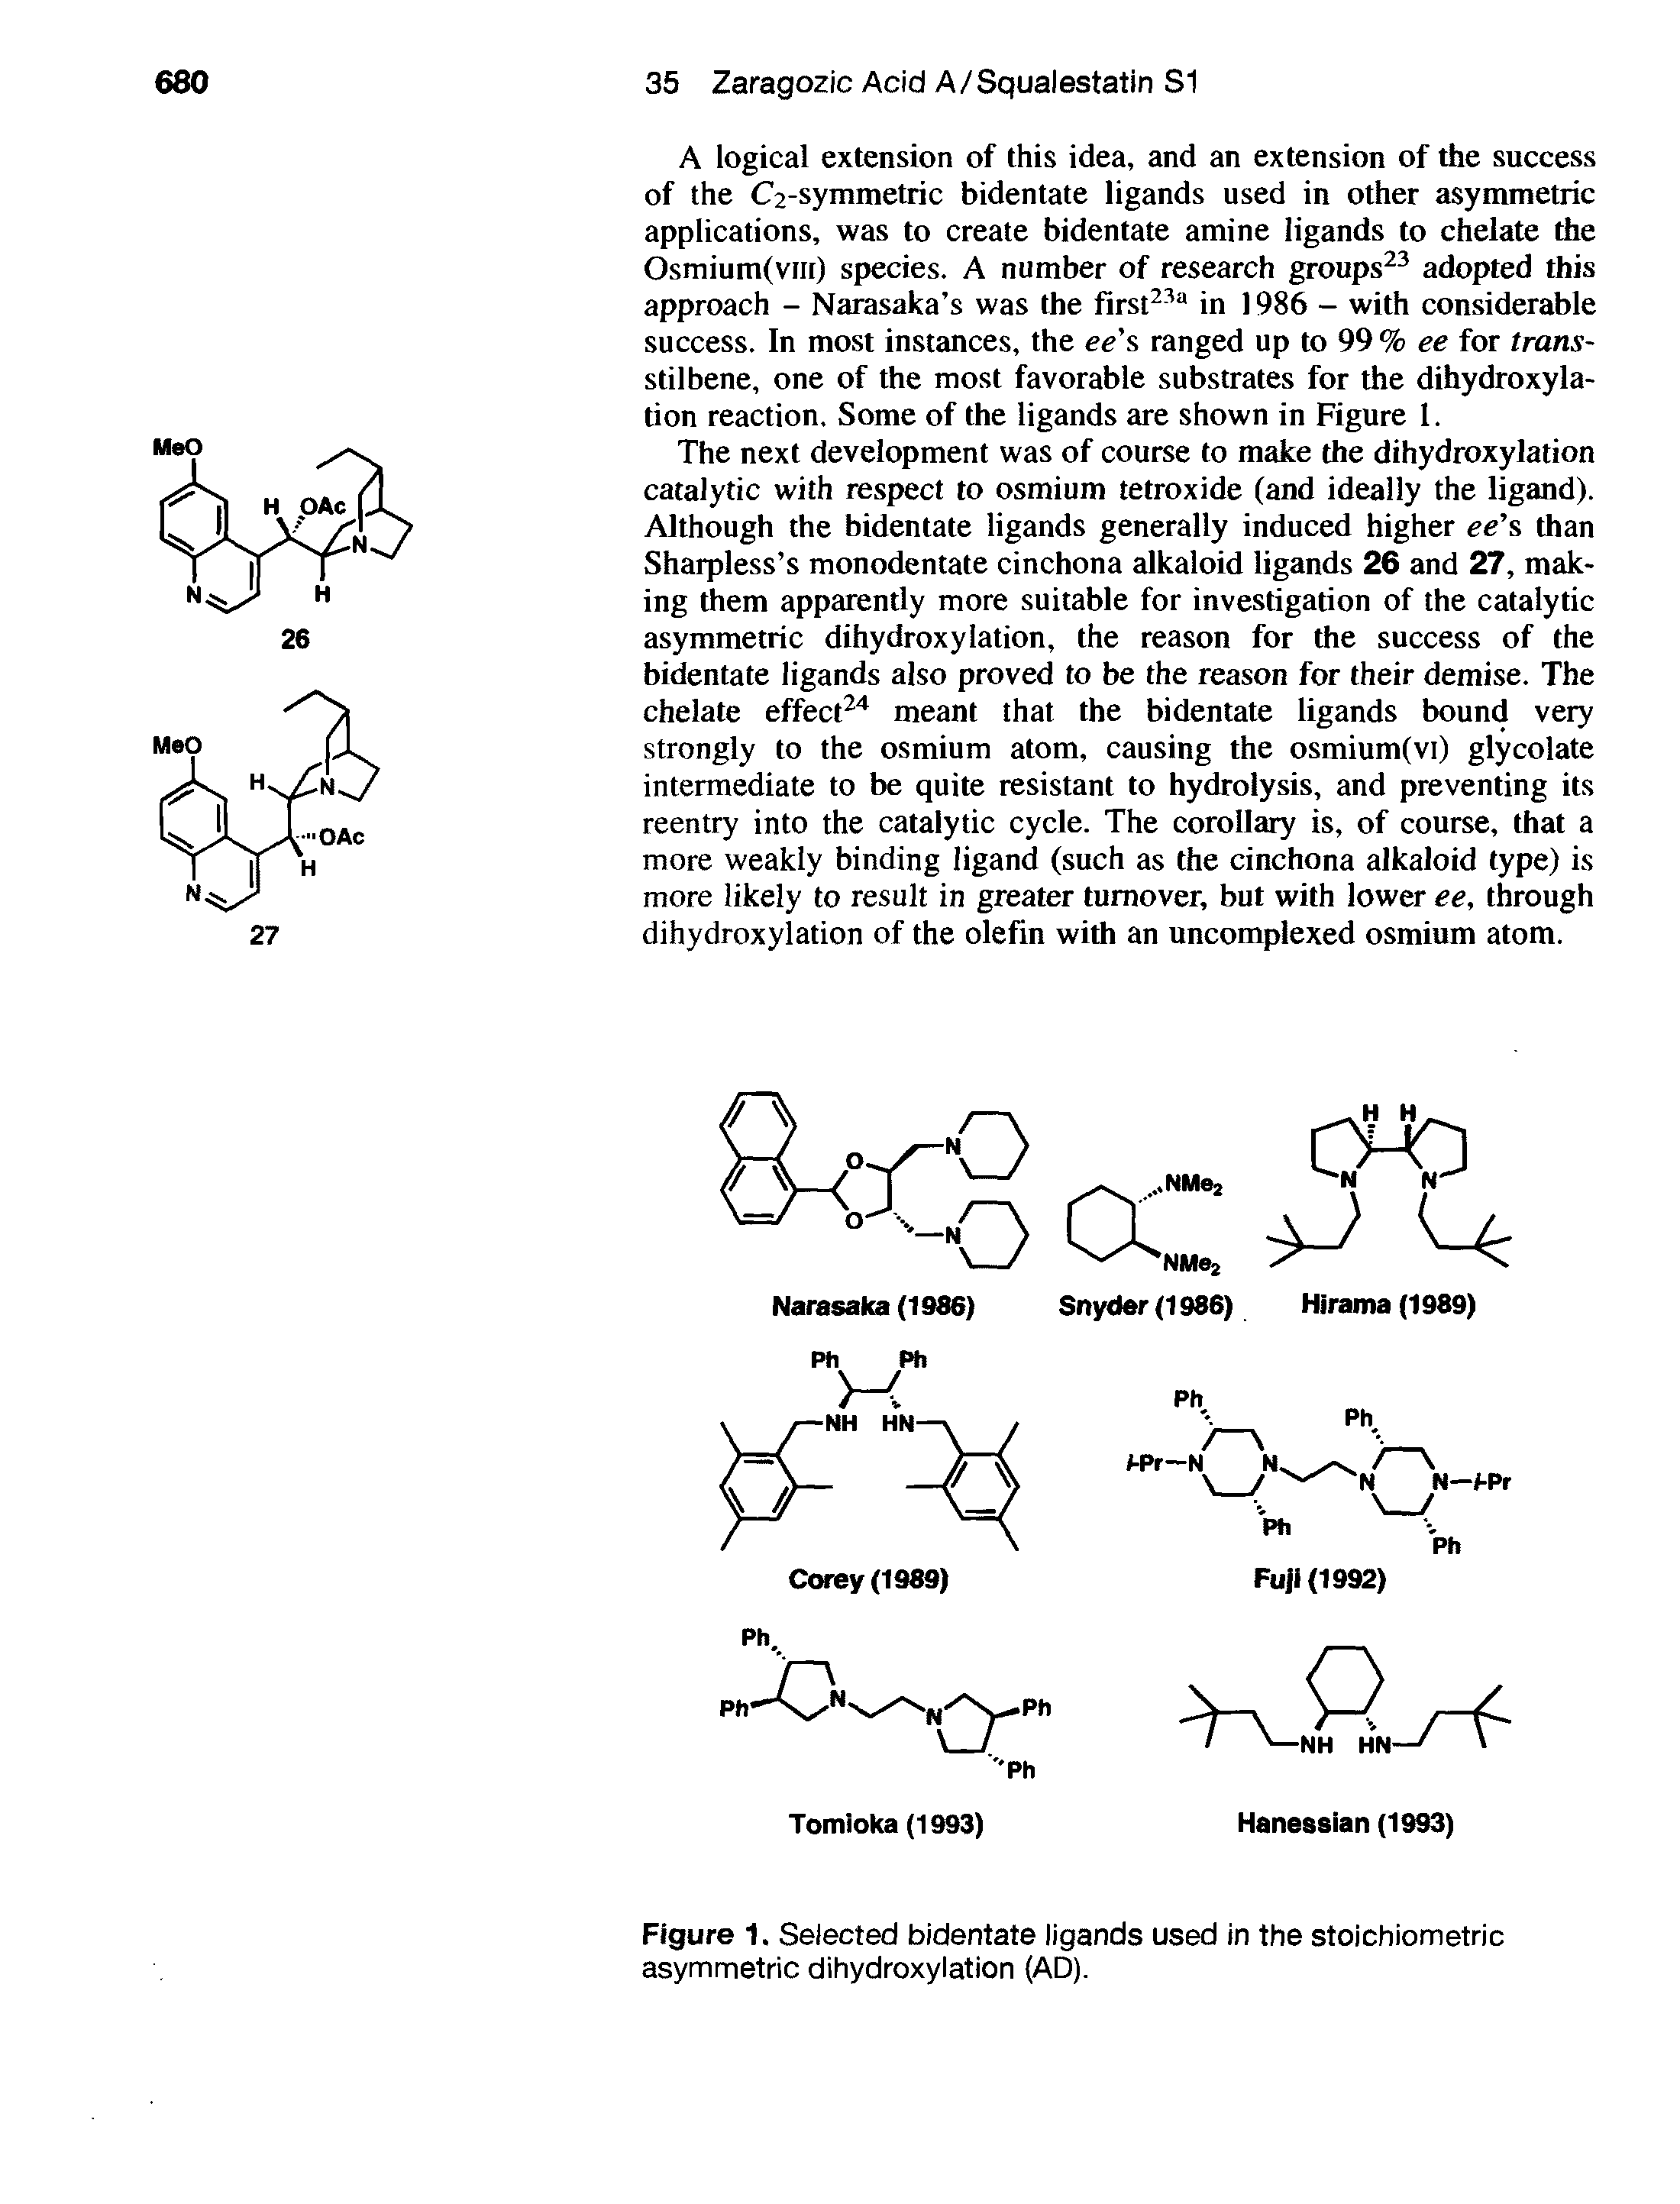 Figure 1. Selected bidentate ligands used in the stoichiometric asymmetric dihydroxylation (AD).